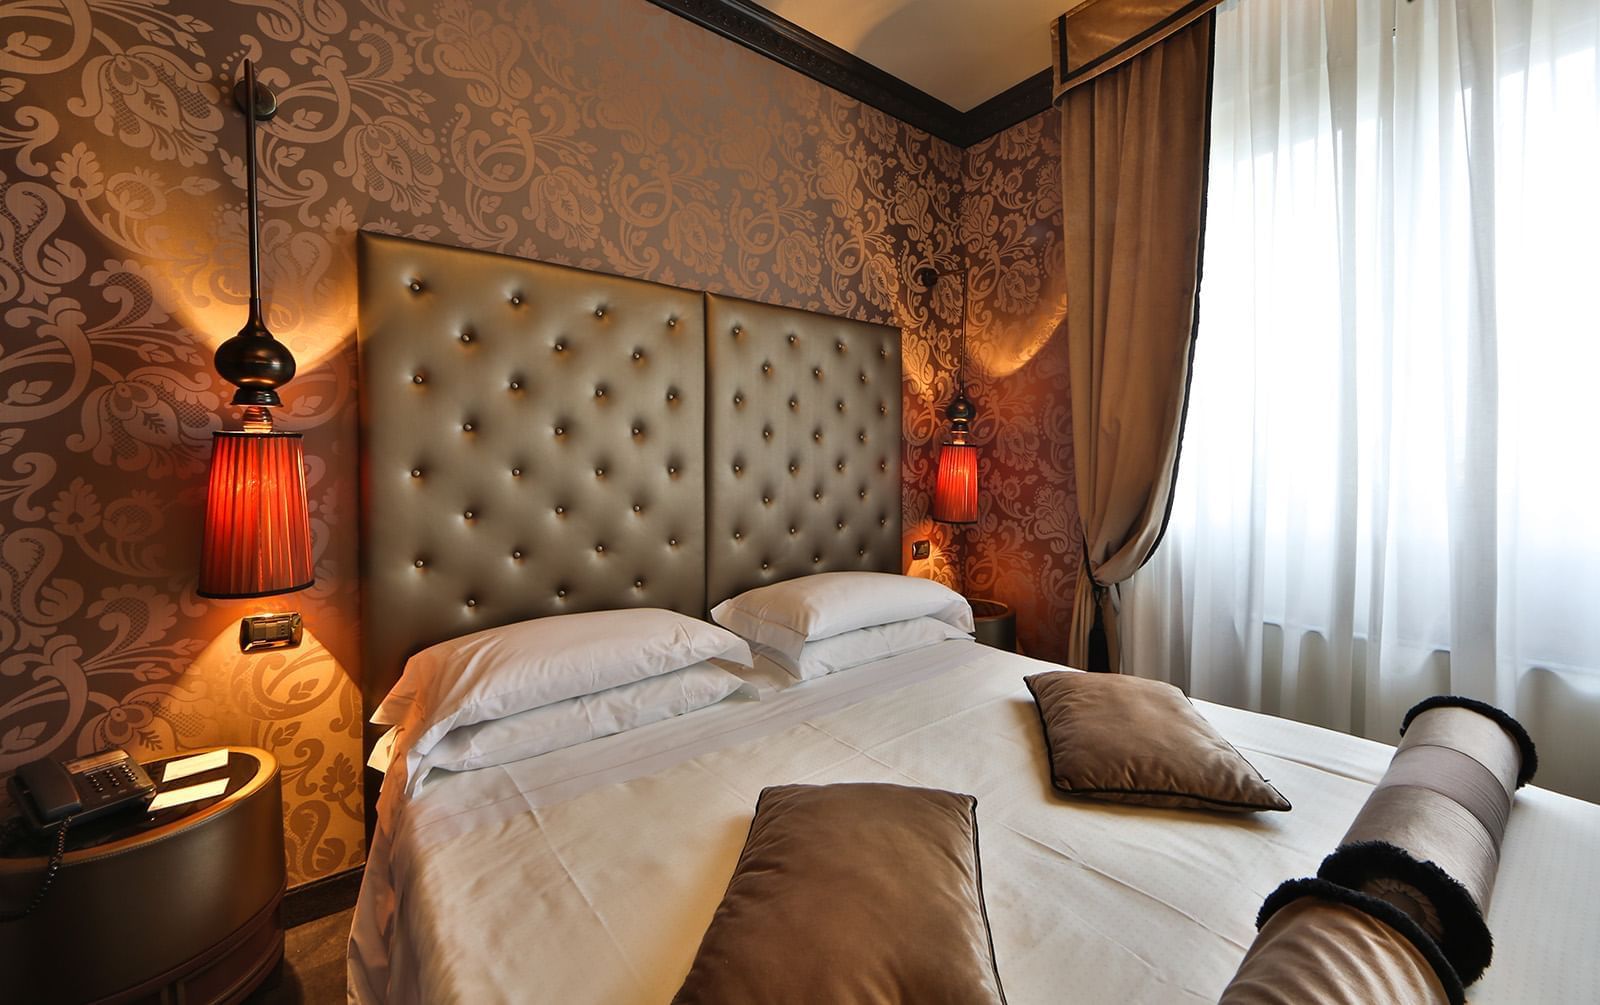 2016 SPECIAL! DELUXE room at the same price of STANDARD room! - Milan Hotel  Deals